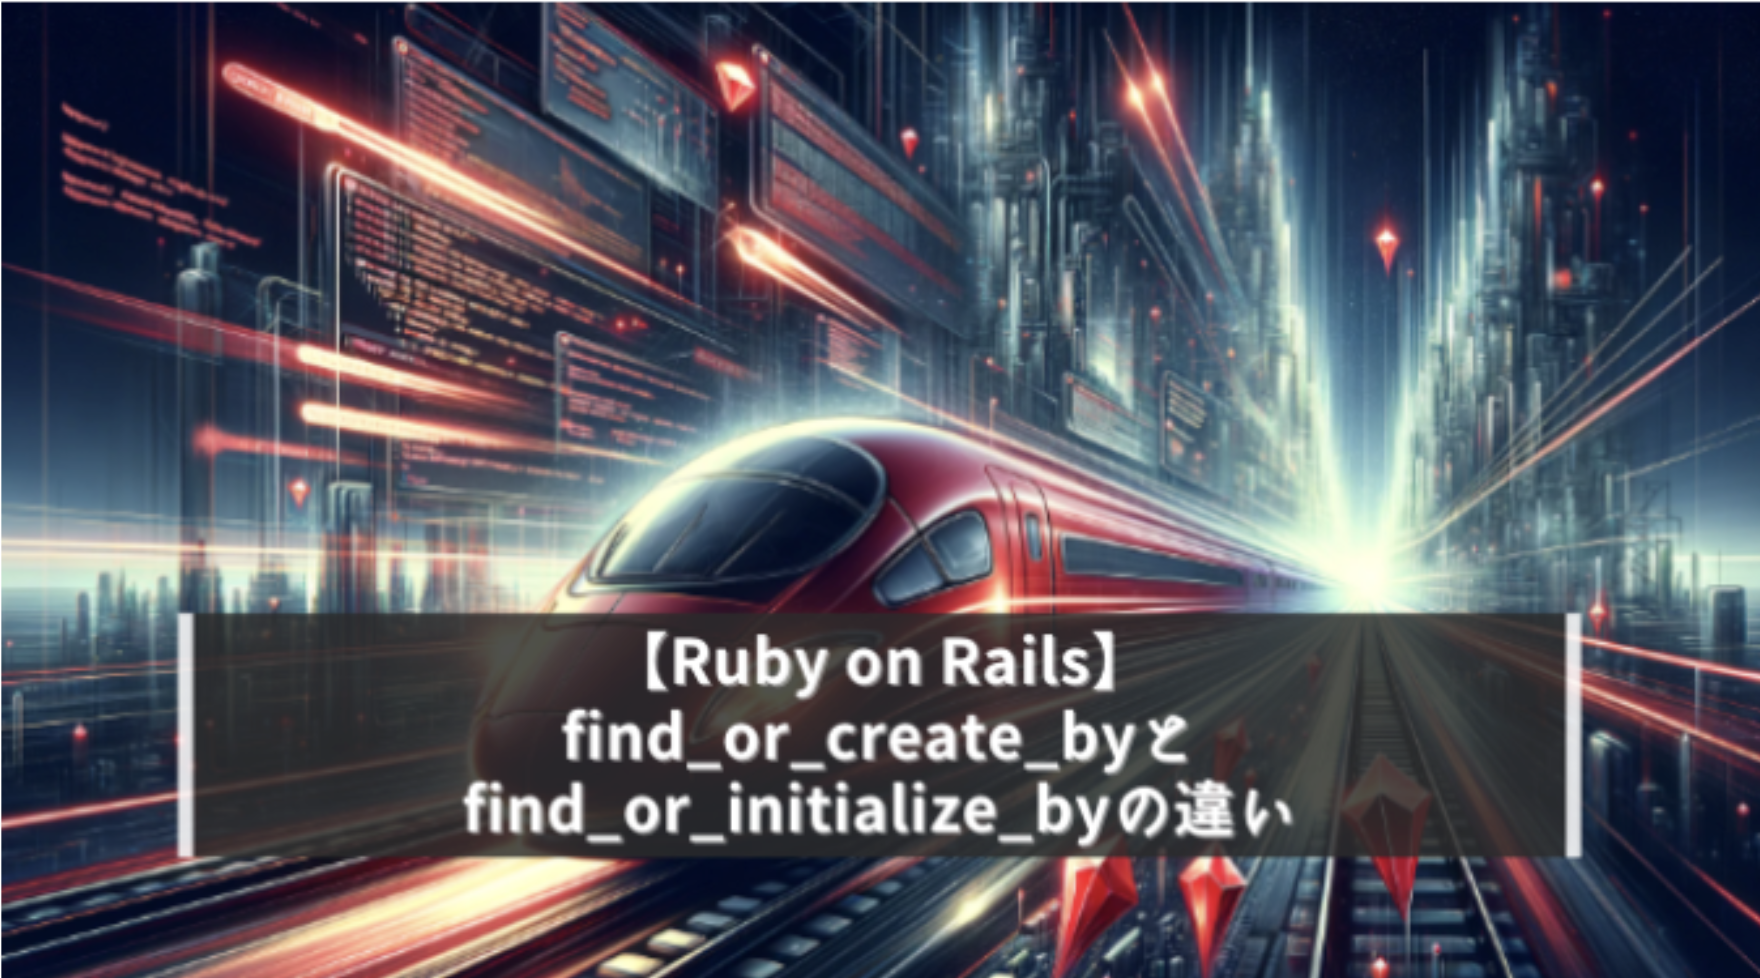 【Ruby on Rails】find_or_create_byとfind_or_initialize_byの違い？